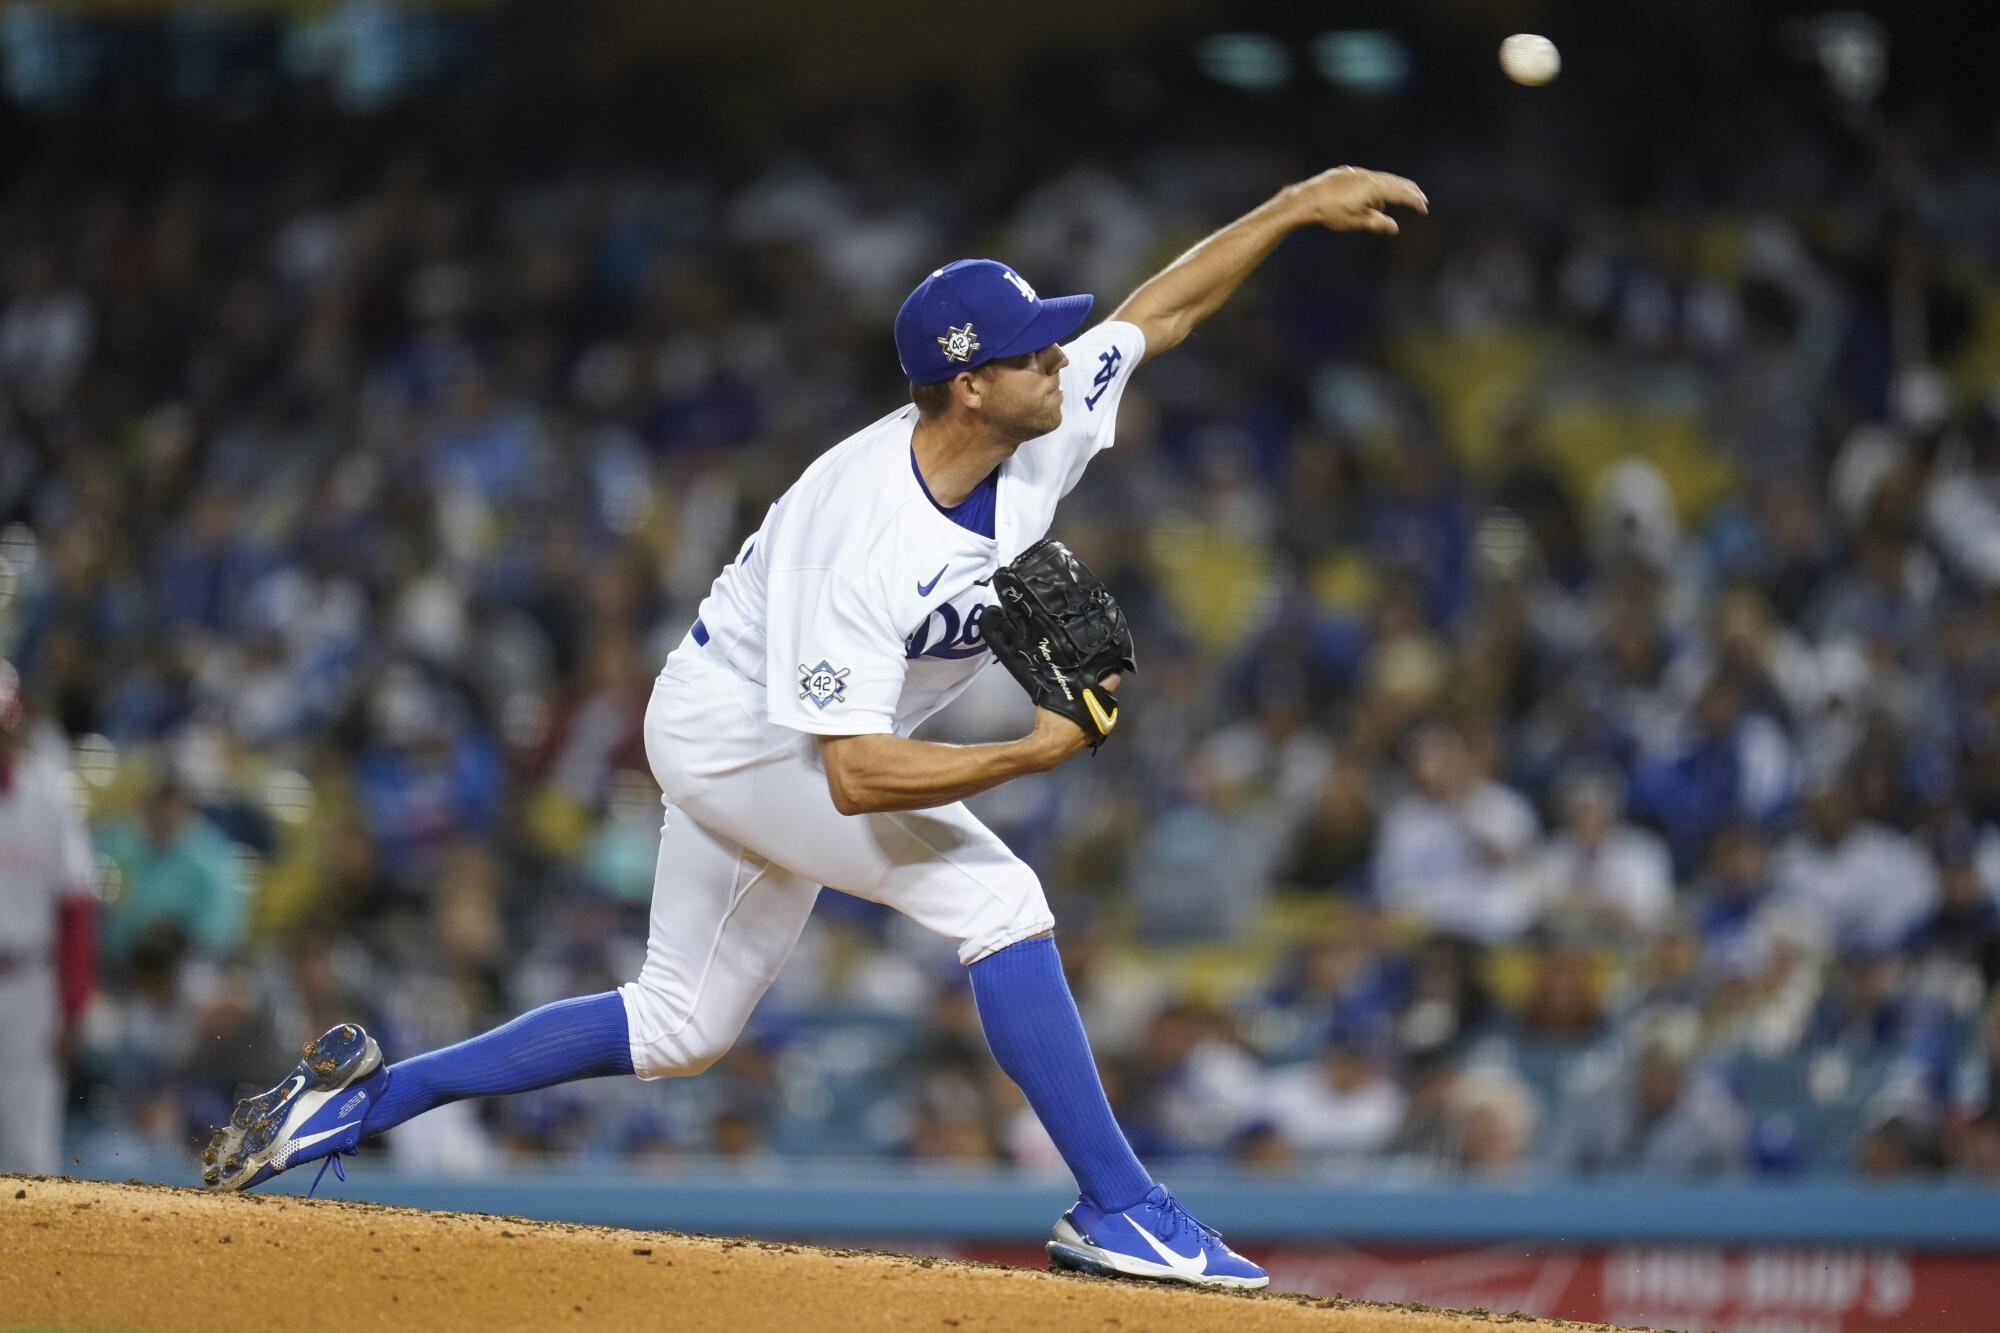 Dodgers relief pitcher Tyler Anderson throws during the fourth inning of a 3-1 win over the Cincinnati Reds on Friday.